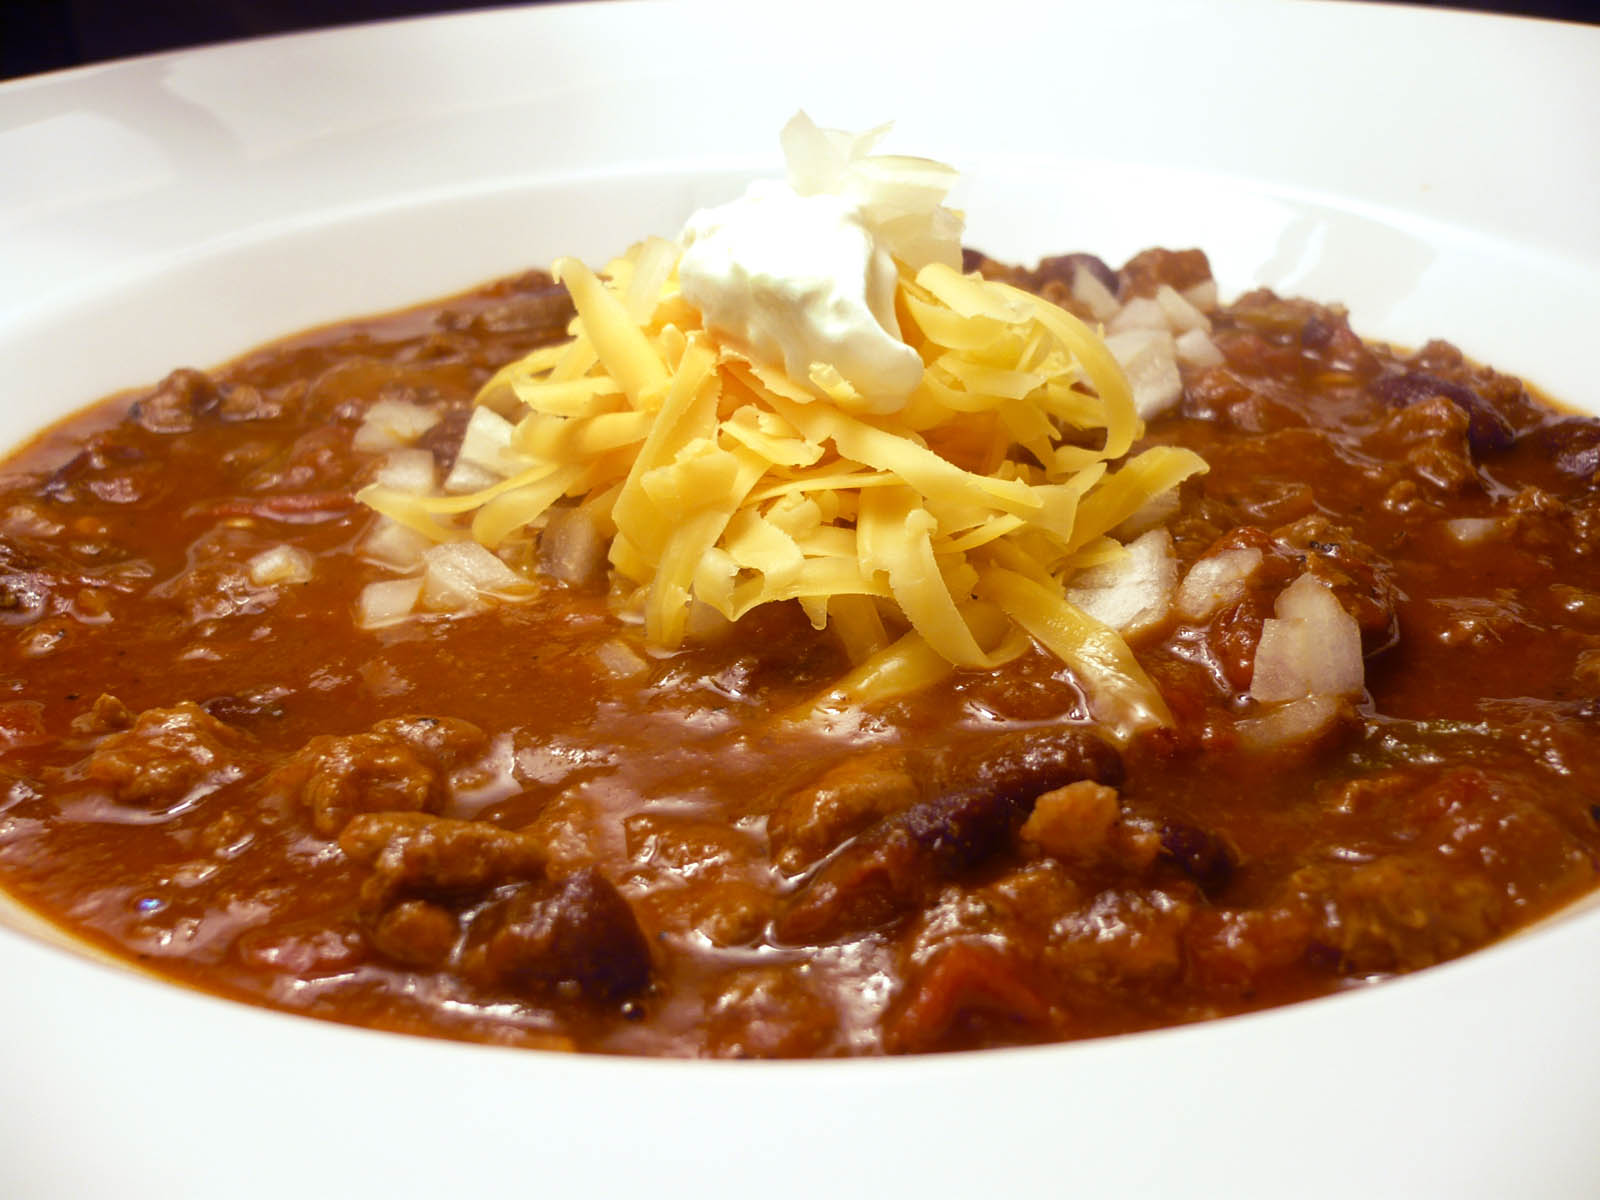 Plan “B” Revisited: All About Chili! – The Man Who Ate South Jersey